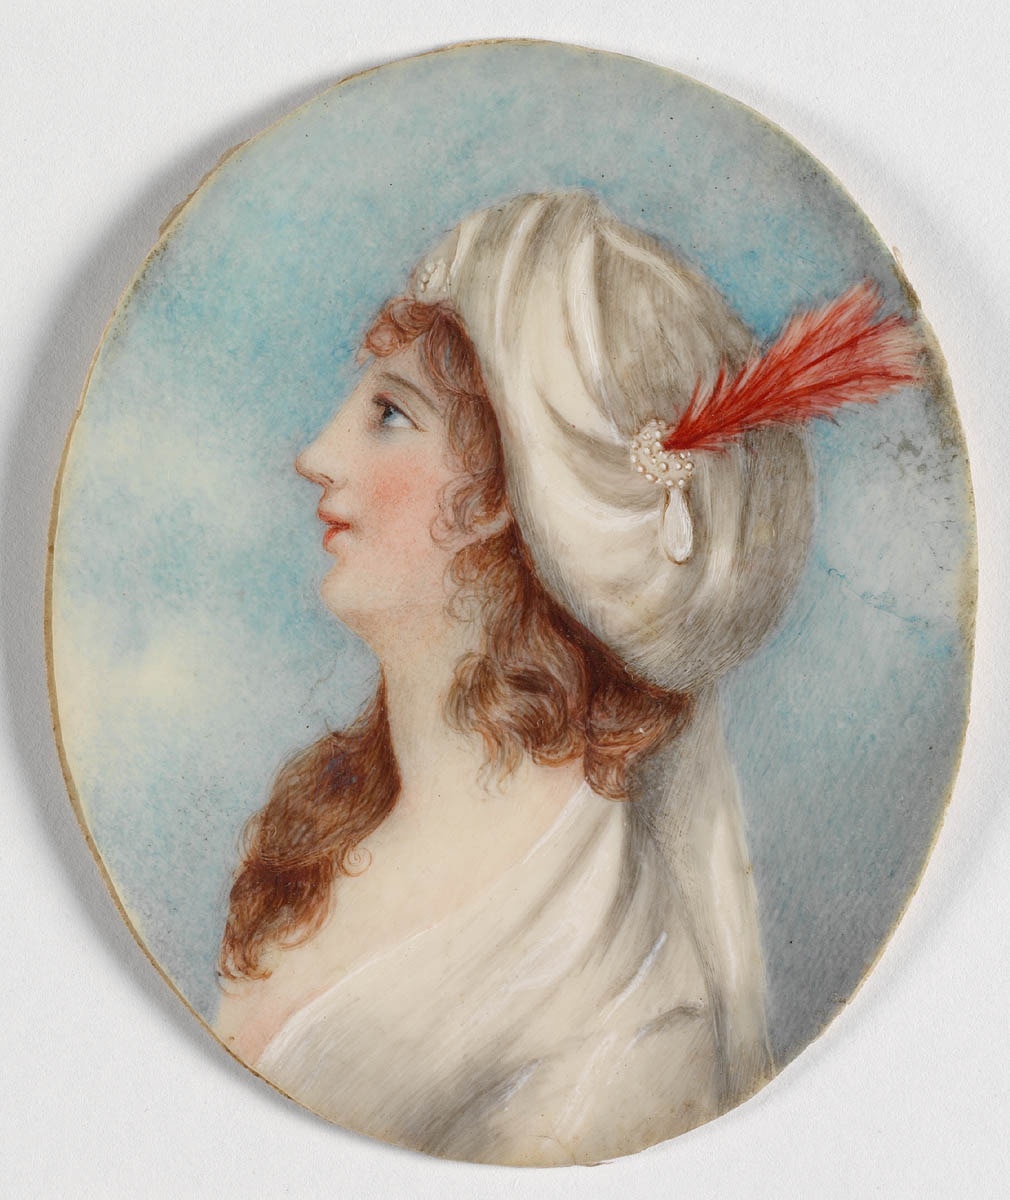 Tiny brooch with a portrait of a fair skinned woman with red curls 